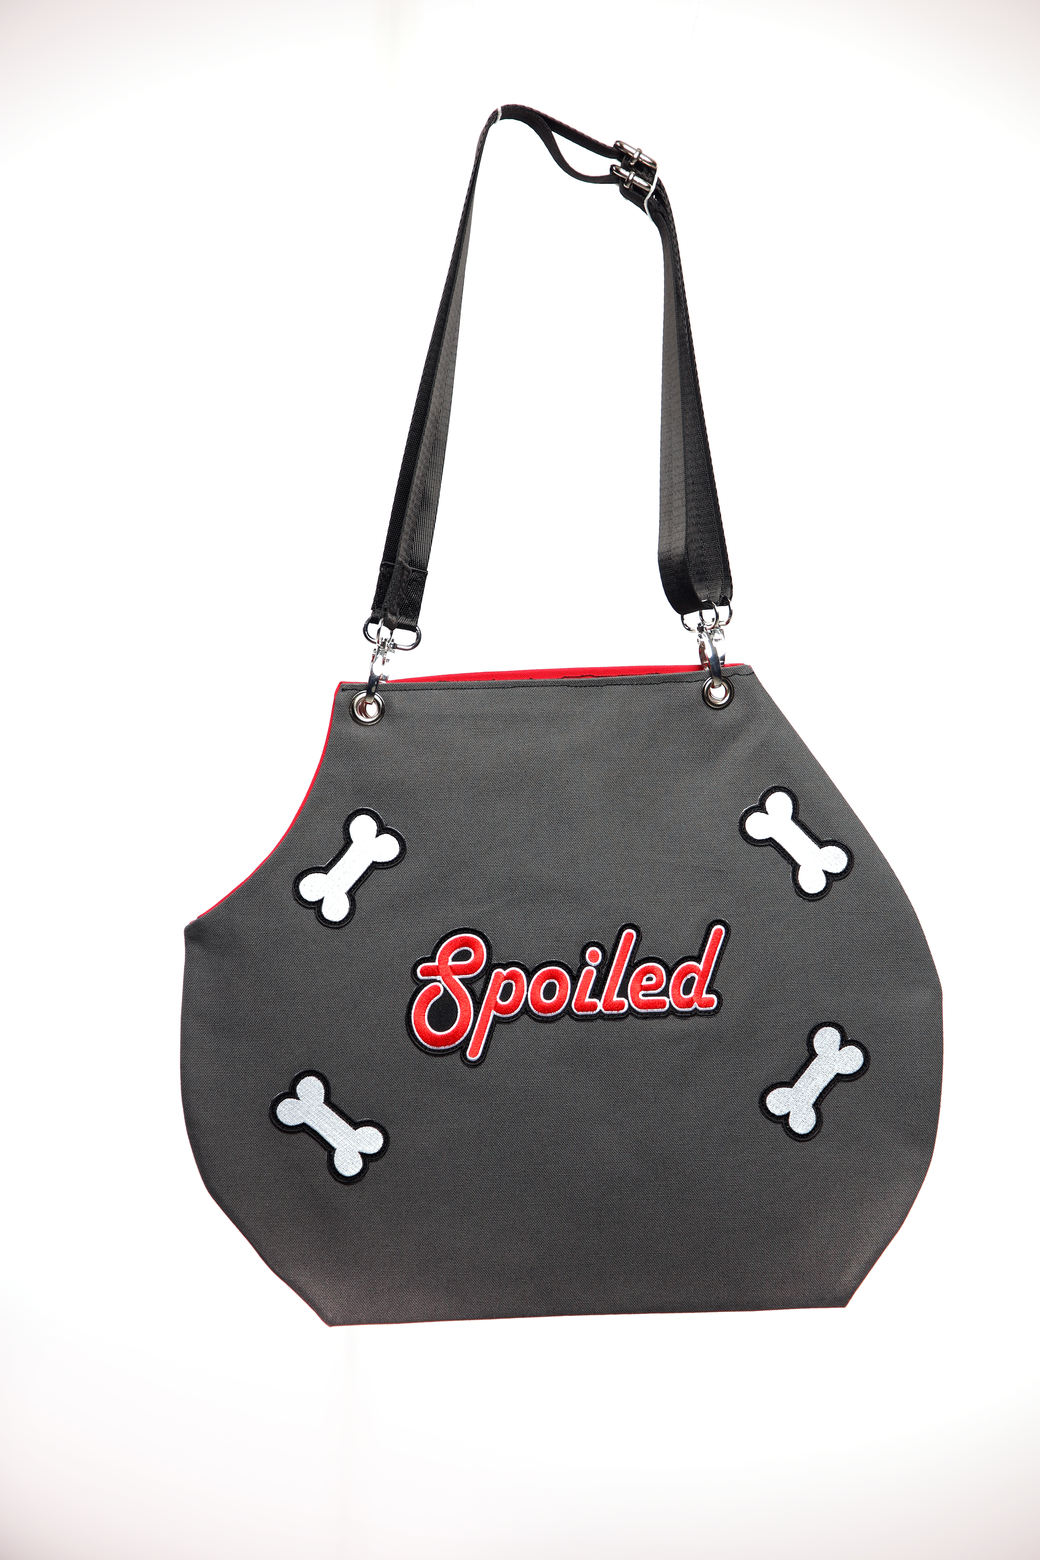 * Spoiled Cut Out Tote Bag